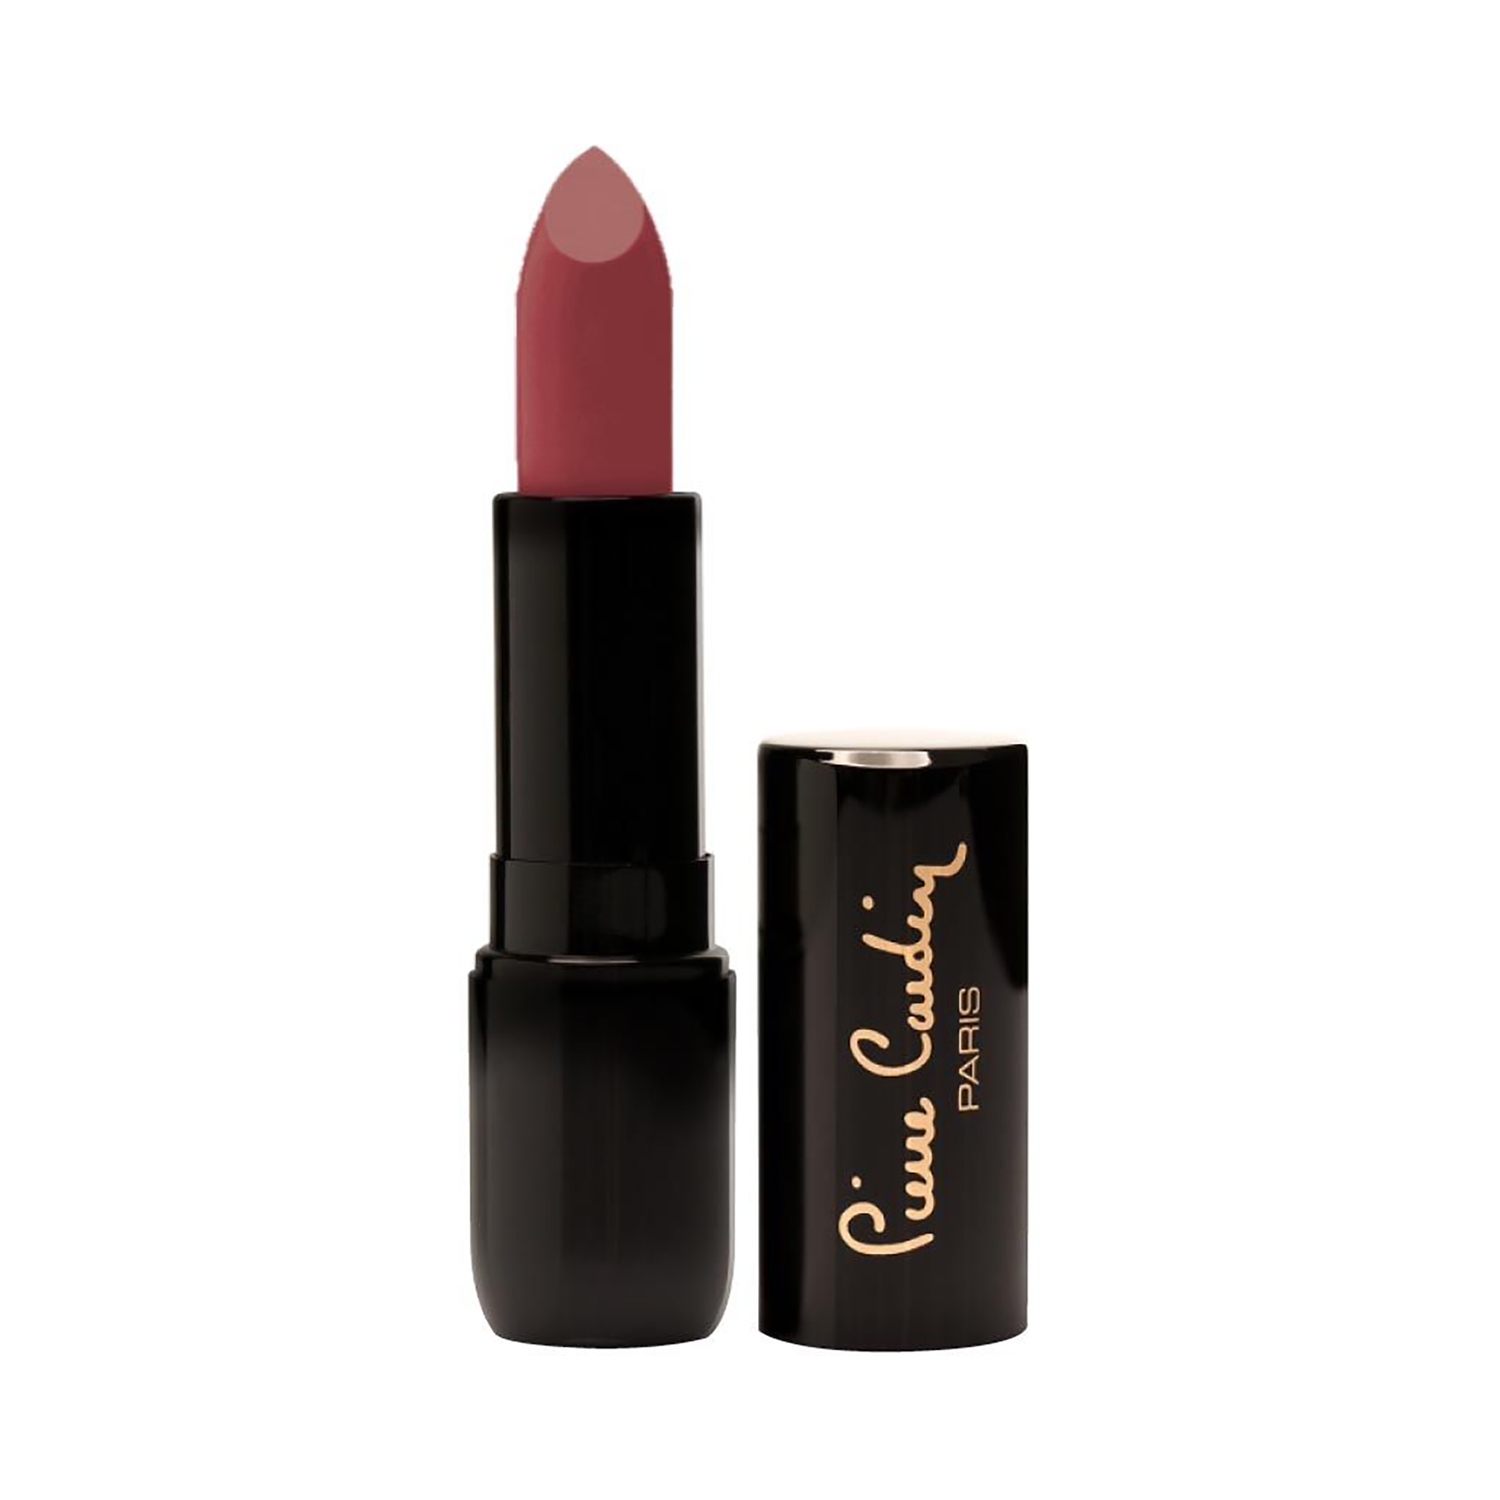 Pierre Cardin Paris | Pierre Cardin Paris Porcelain Edition Rouge Lipstick - 244 Red Wine (4g)